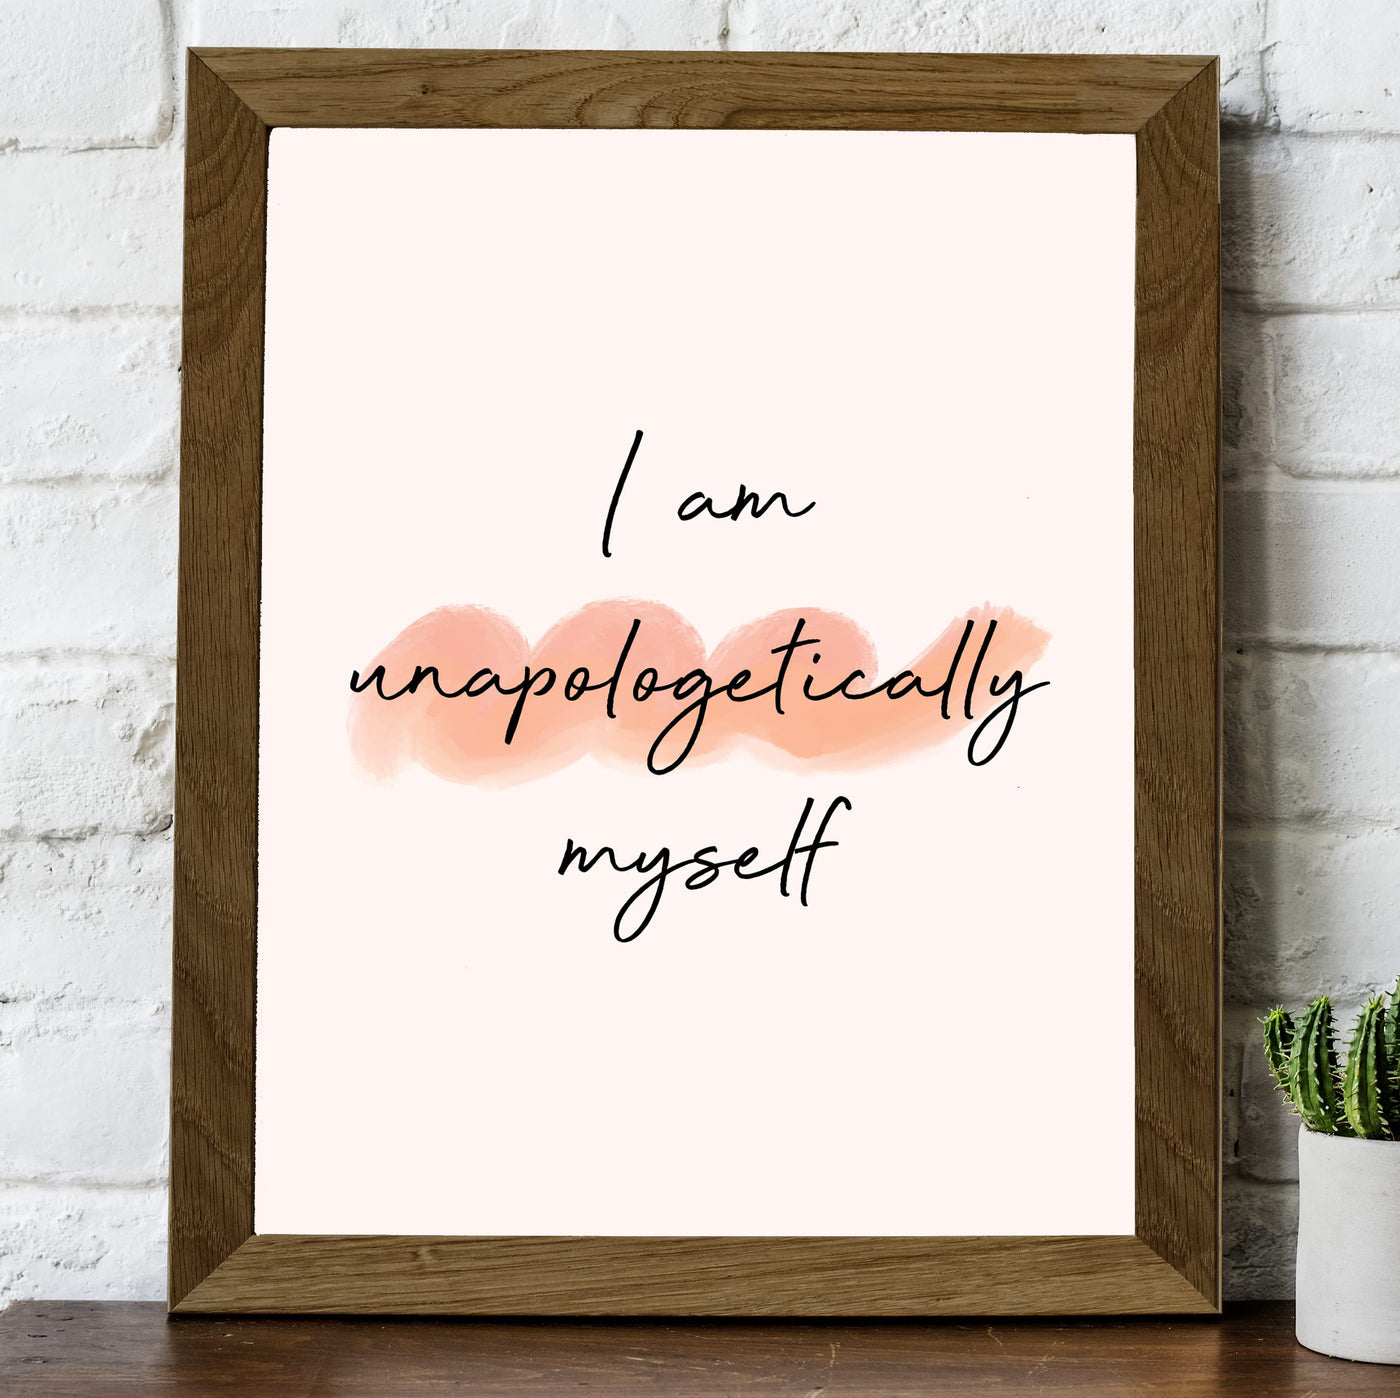 I Am Unapologetically Myself-Inspirational Quotes Wall Art -8 x 10" Motivational Abstract Watercolor Picture Print-Ready to Frame. Modern Home-Office-School-Church Decor. Great Sign for Confidence!